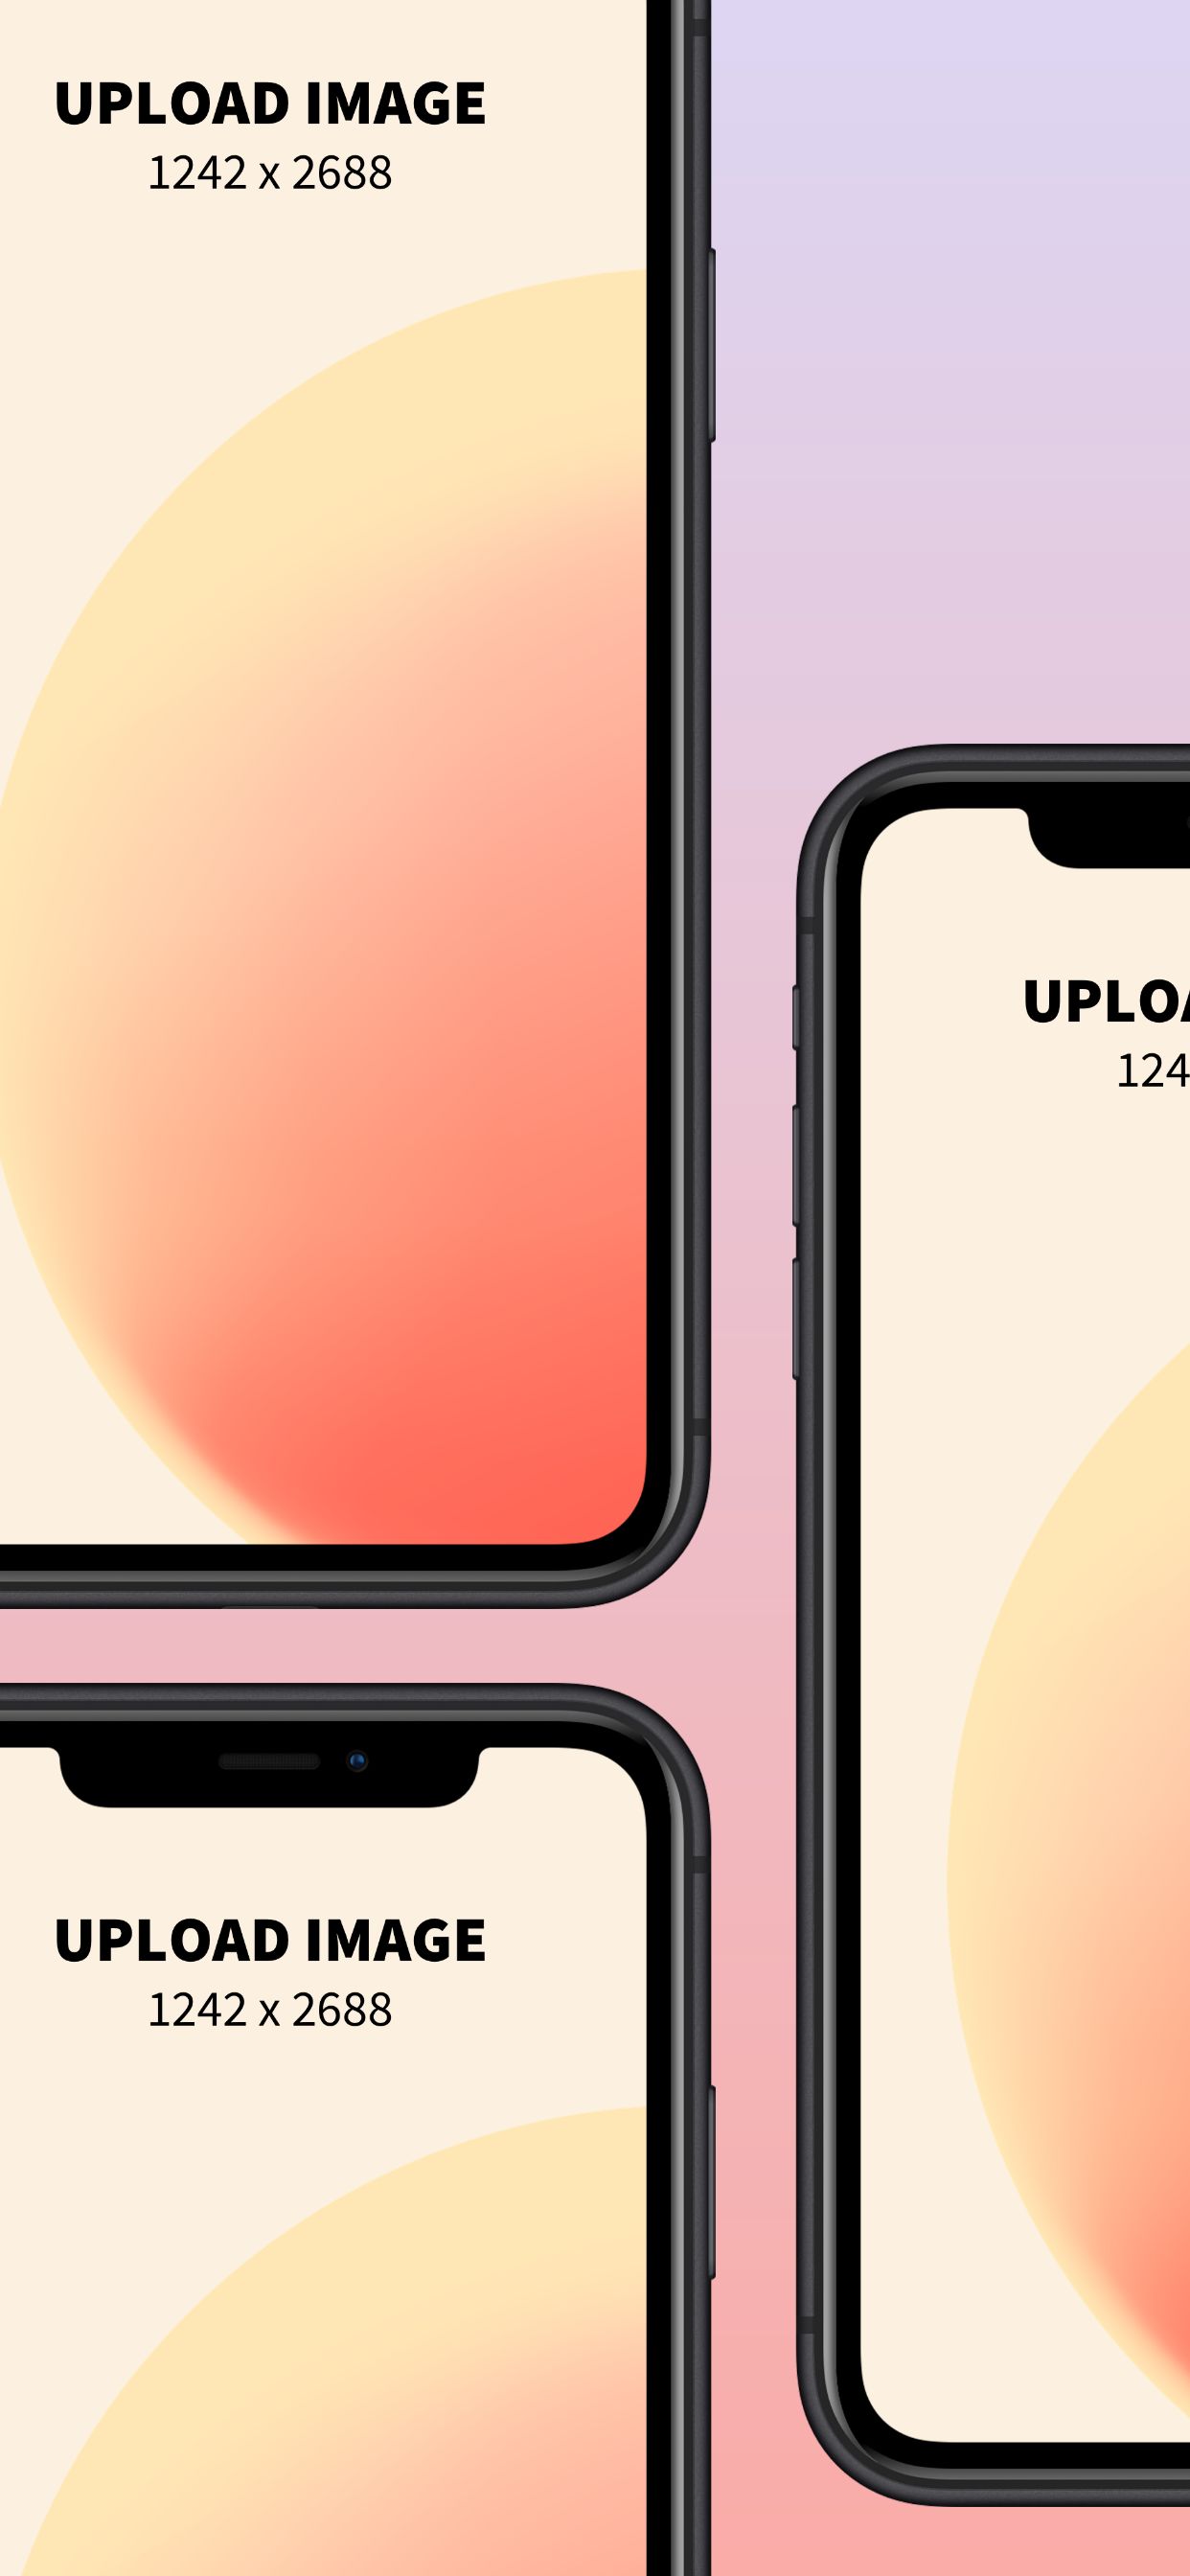 iPhone XS Max Screenshot 11 template. Quickly edit fonts, text, colors, and more for free.